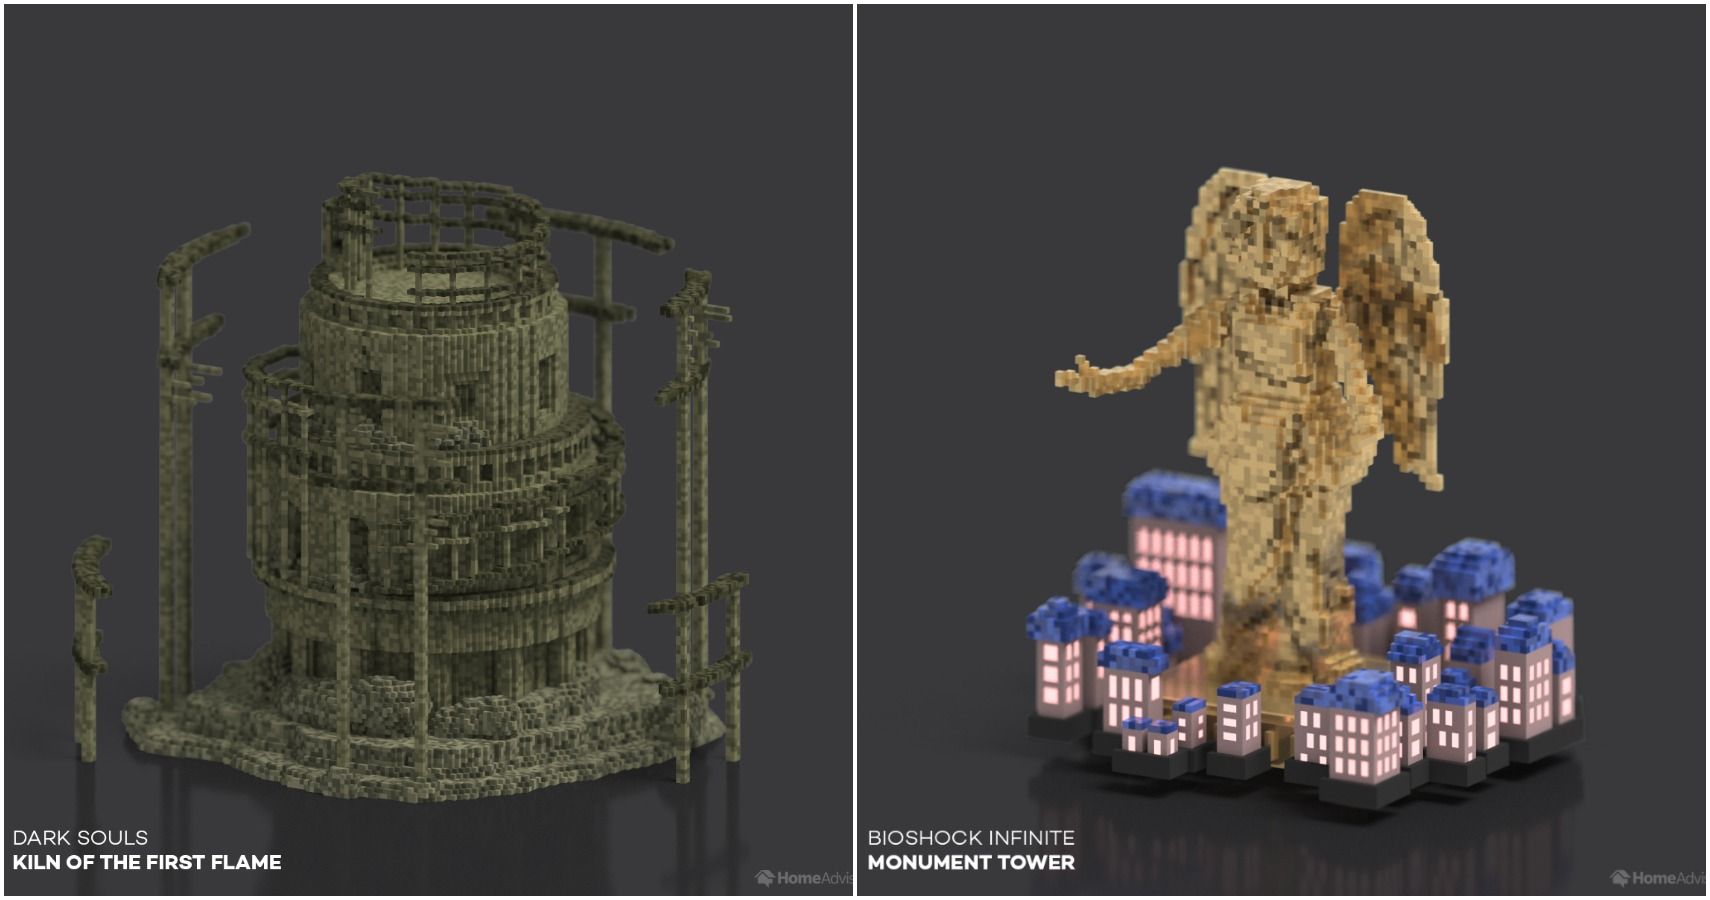 HomeAdvisor's Tribute To Dark Souls Turns Classic Game Locations Into 3D Voxel Art